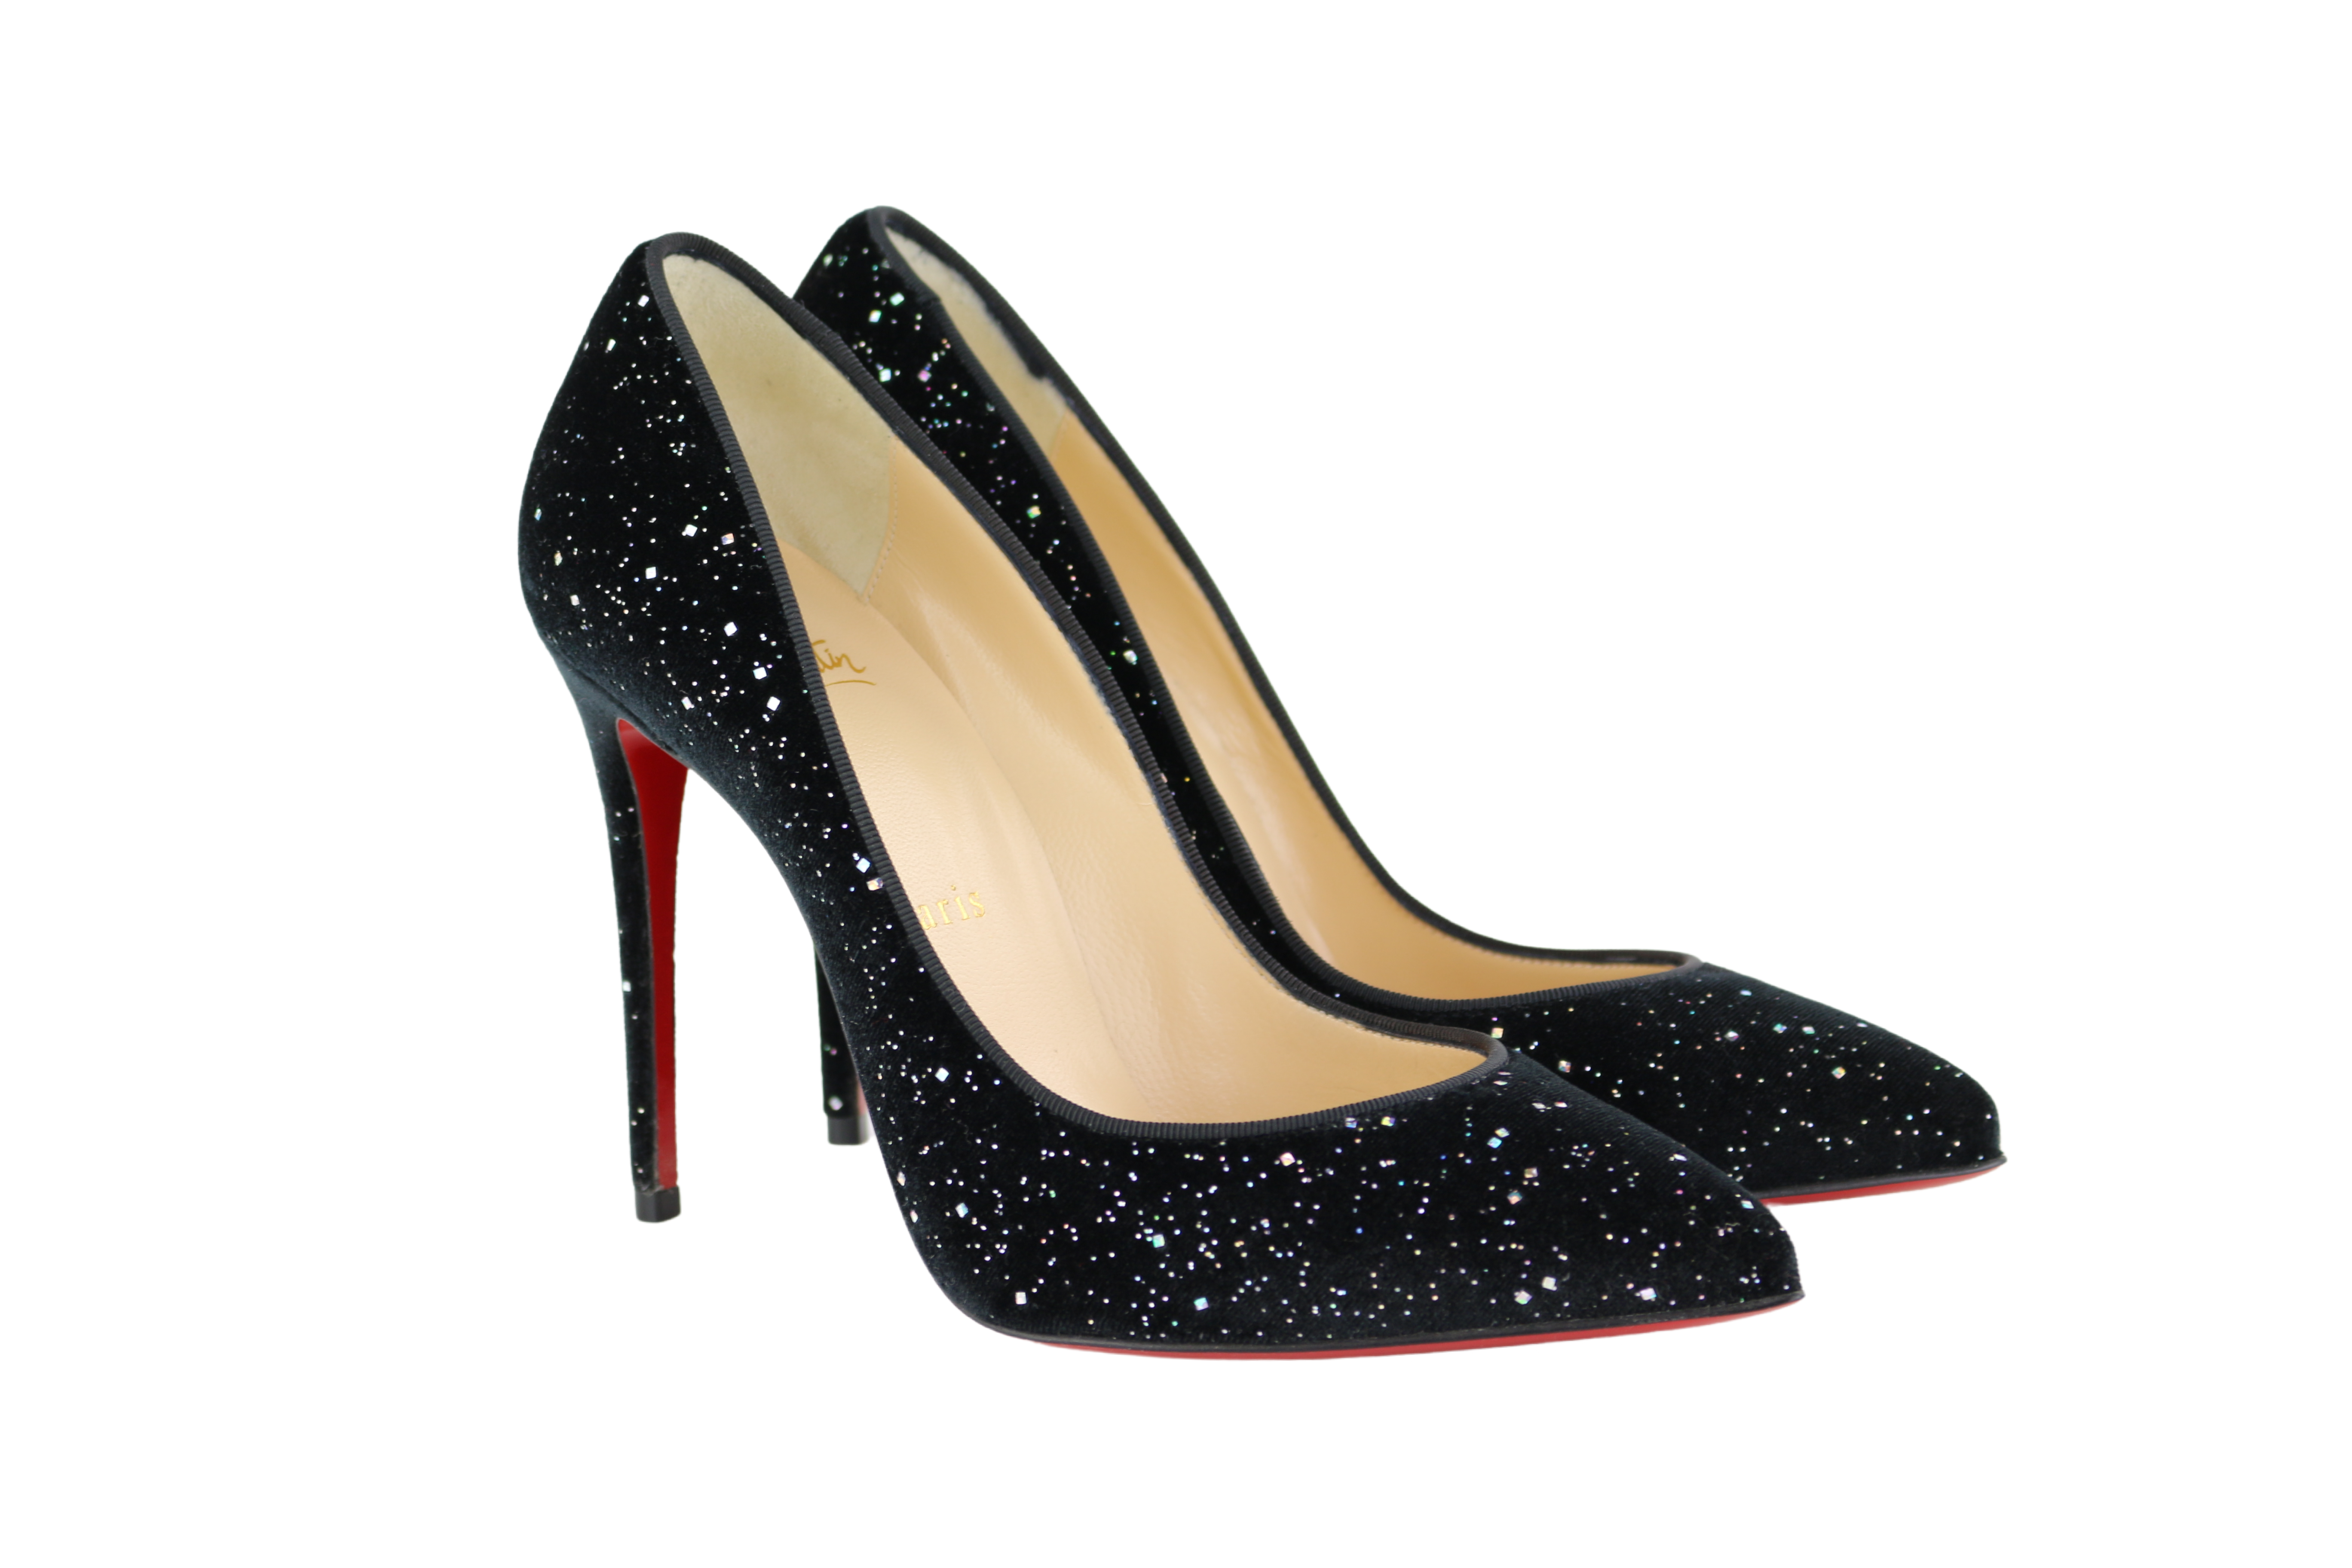 2 Differences Between Christian Louboutin's Pigalle Follies & So